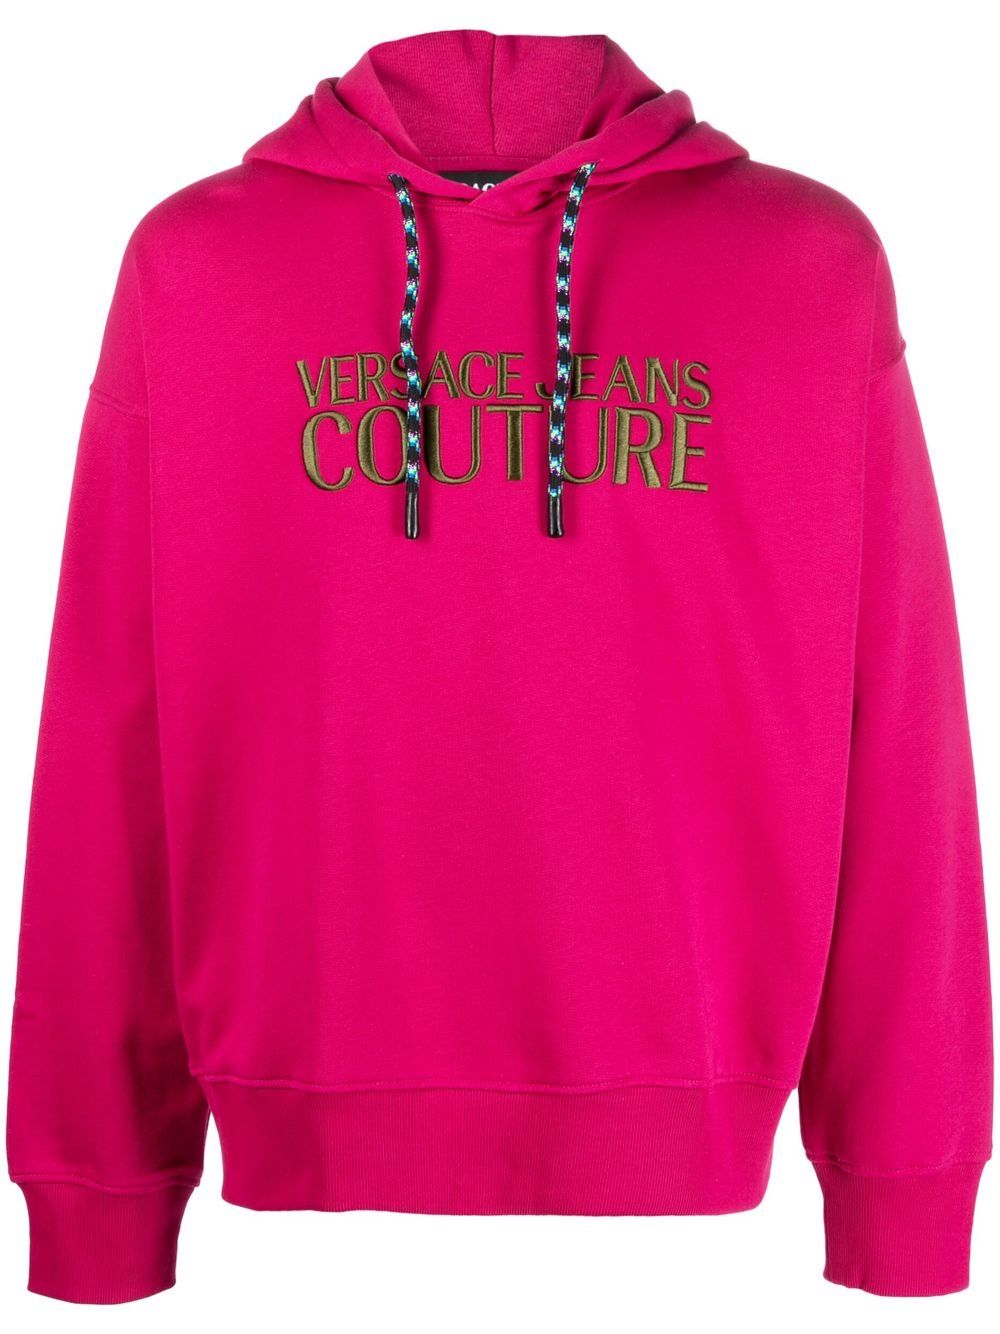 Versace Jeans Couture Hoodie mit Logo-Stickerei - Rosa von Versace Jeans Couture